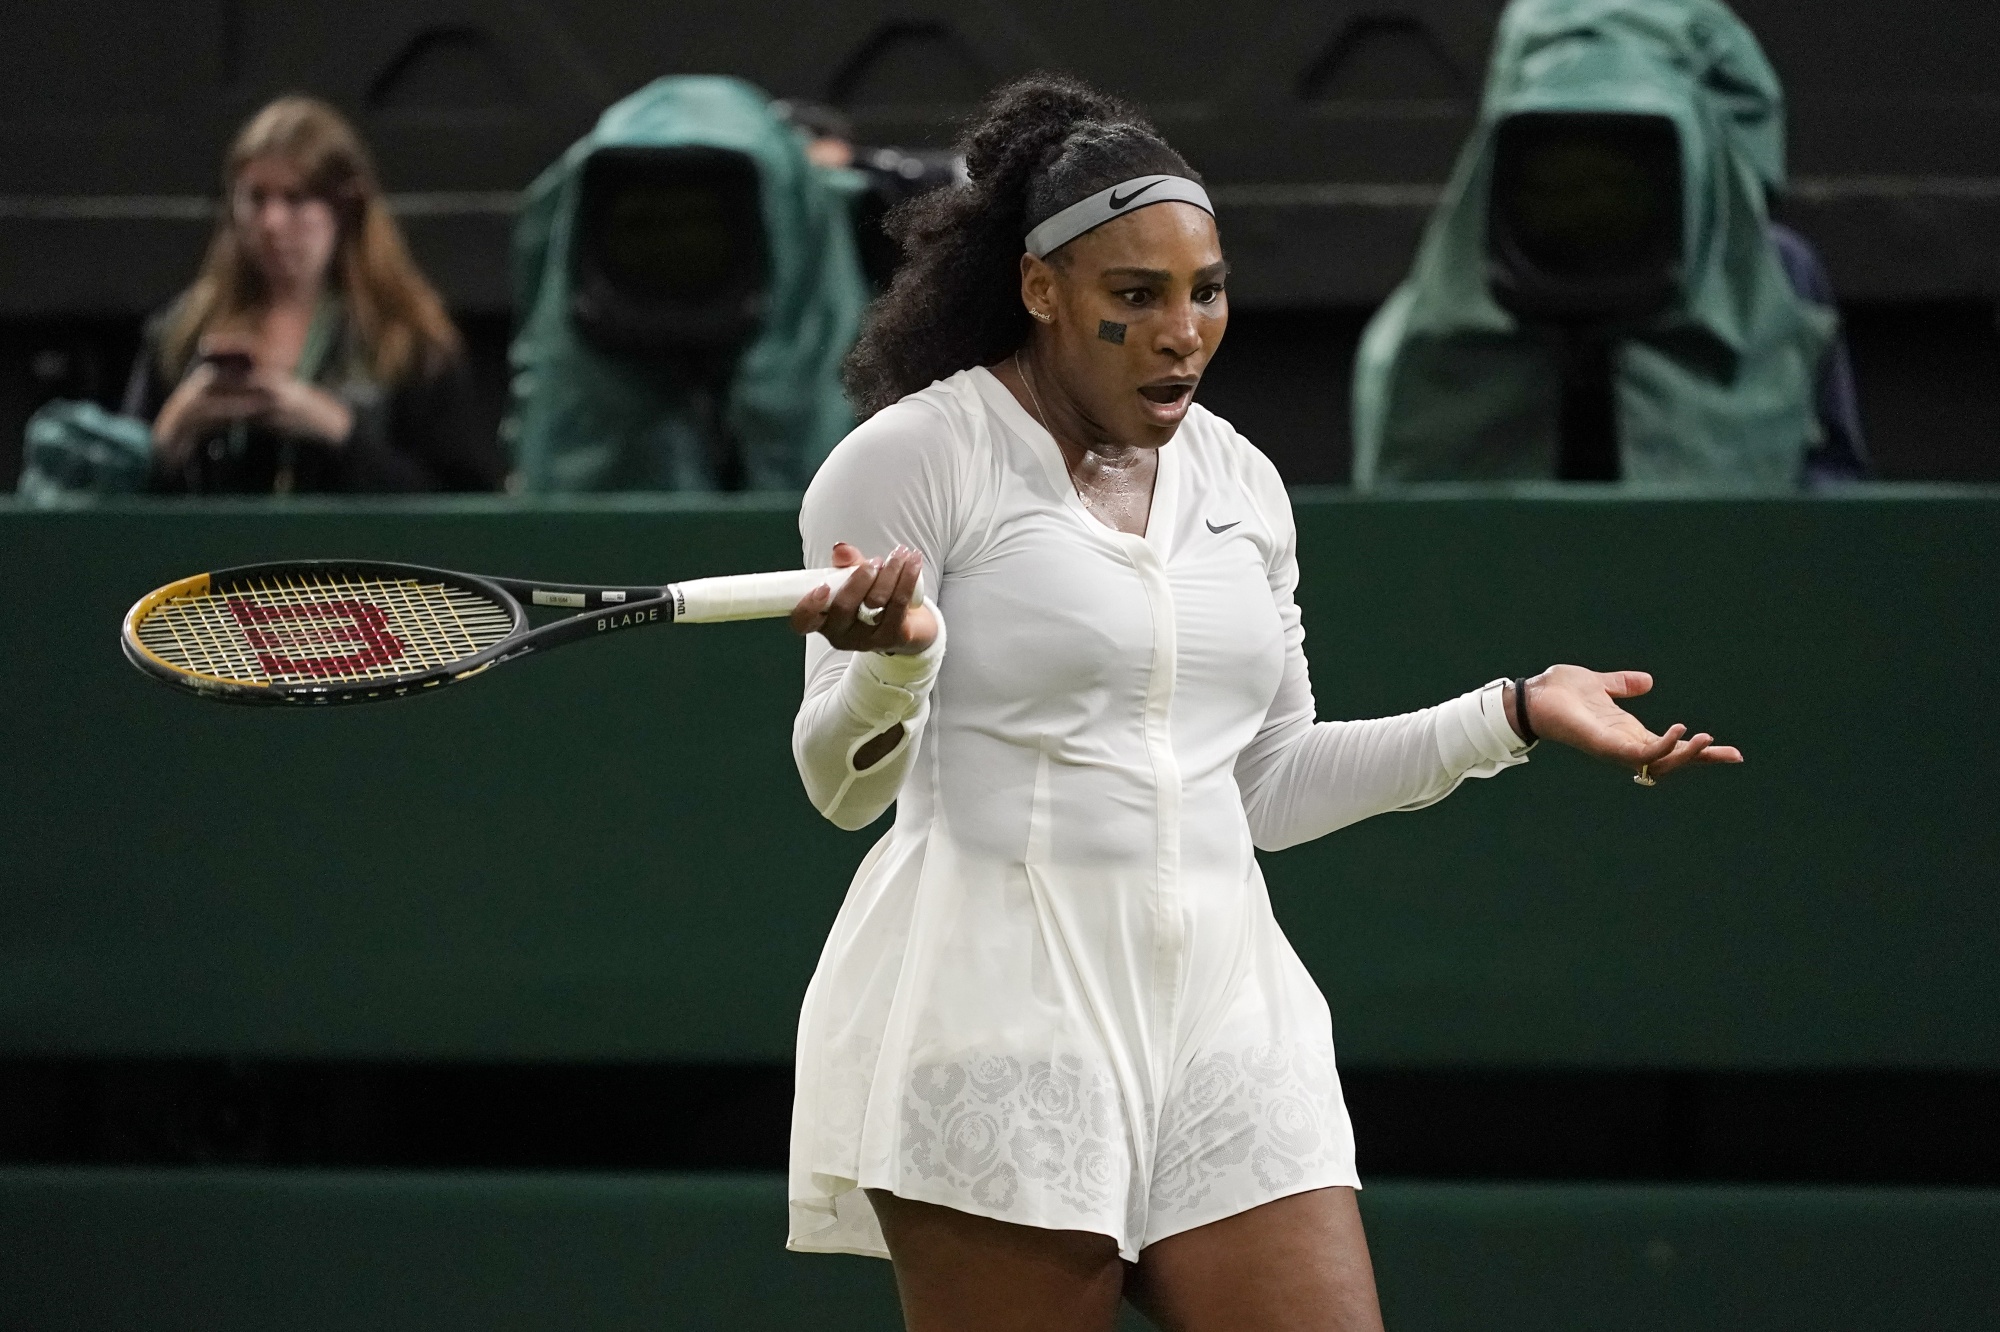 Returning Serena Williams ousted at Wimbledon after shocking 1st